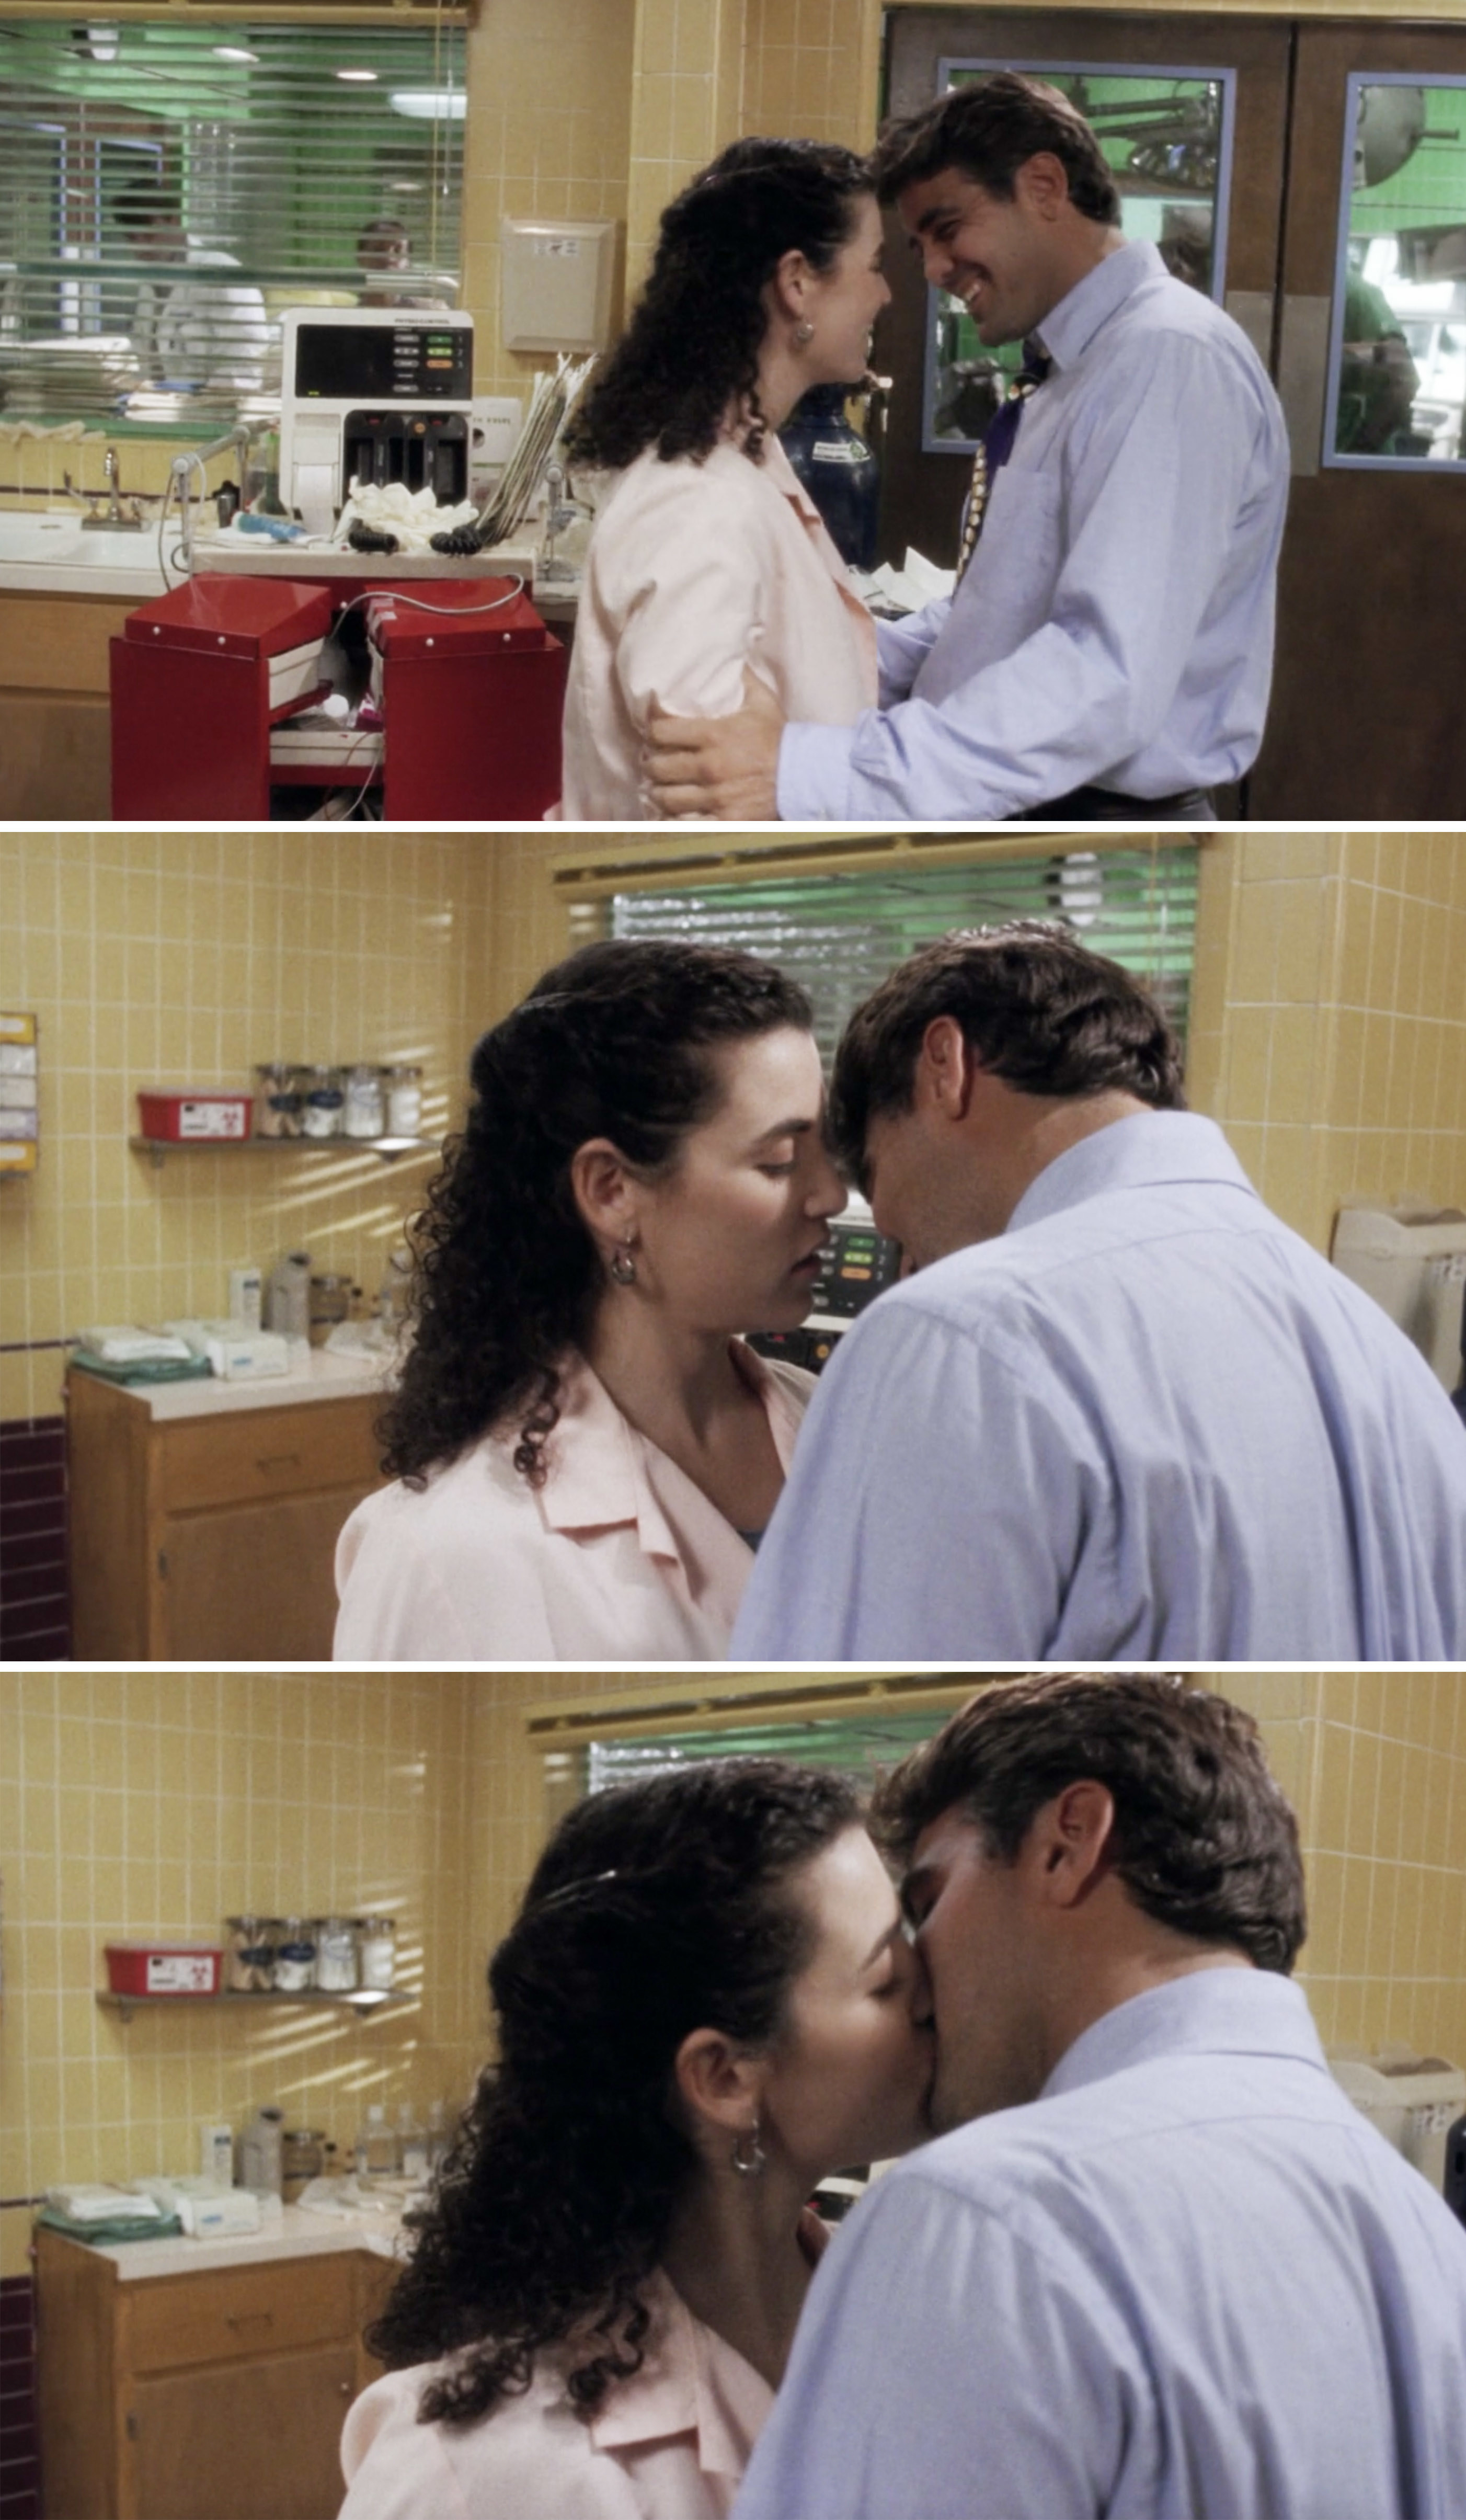 Carol and Doug kissing in an operating room